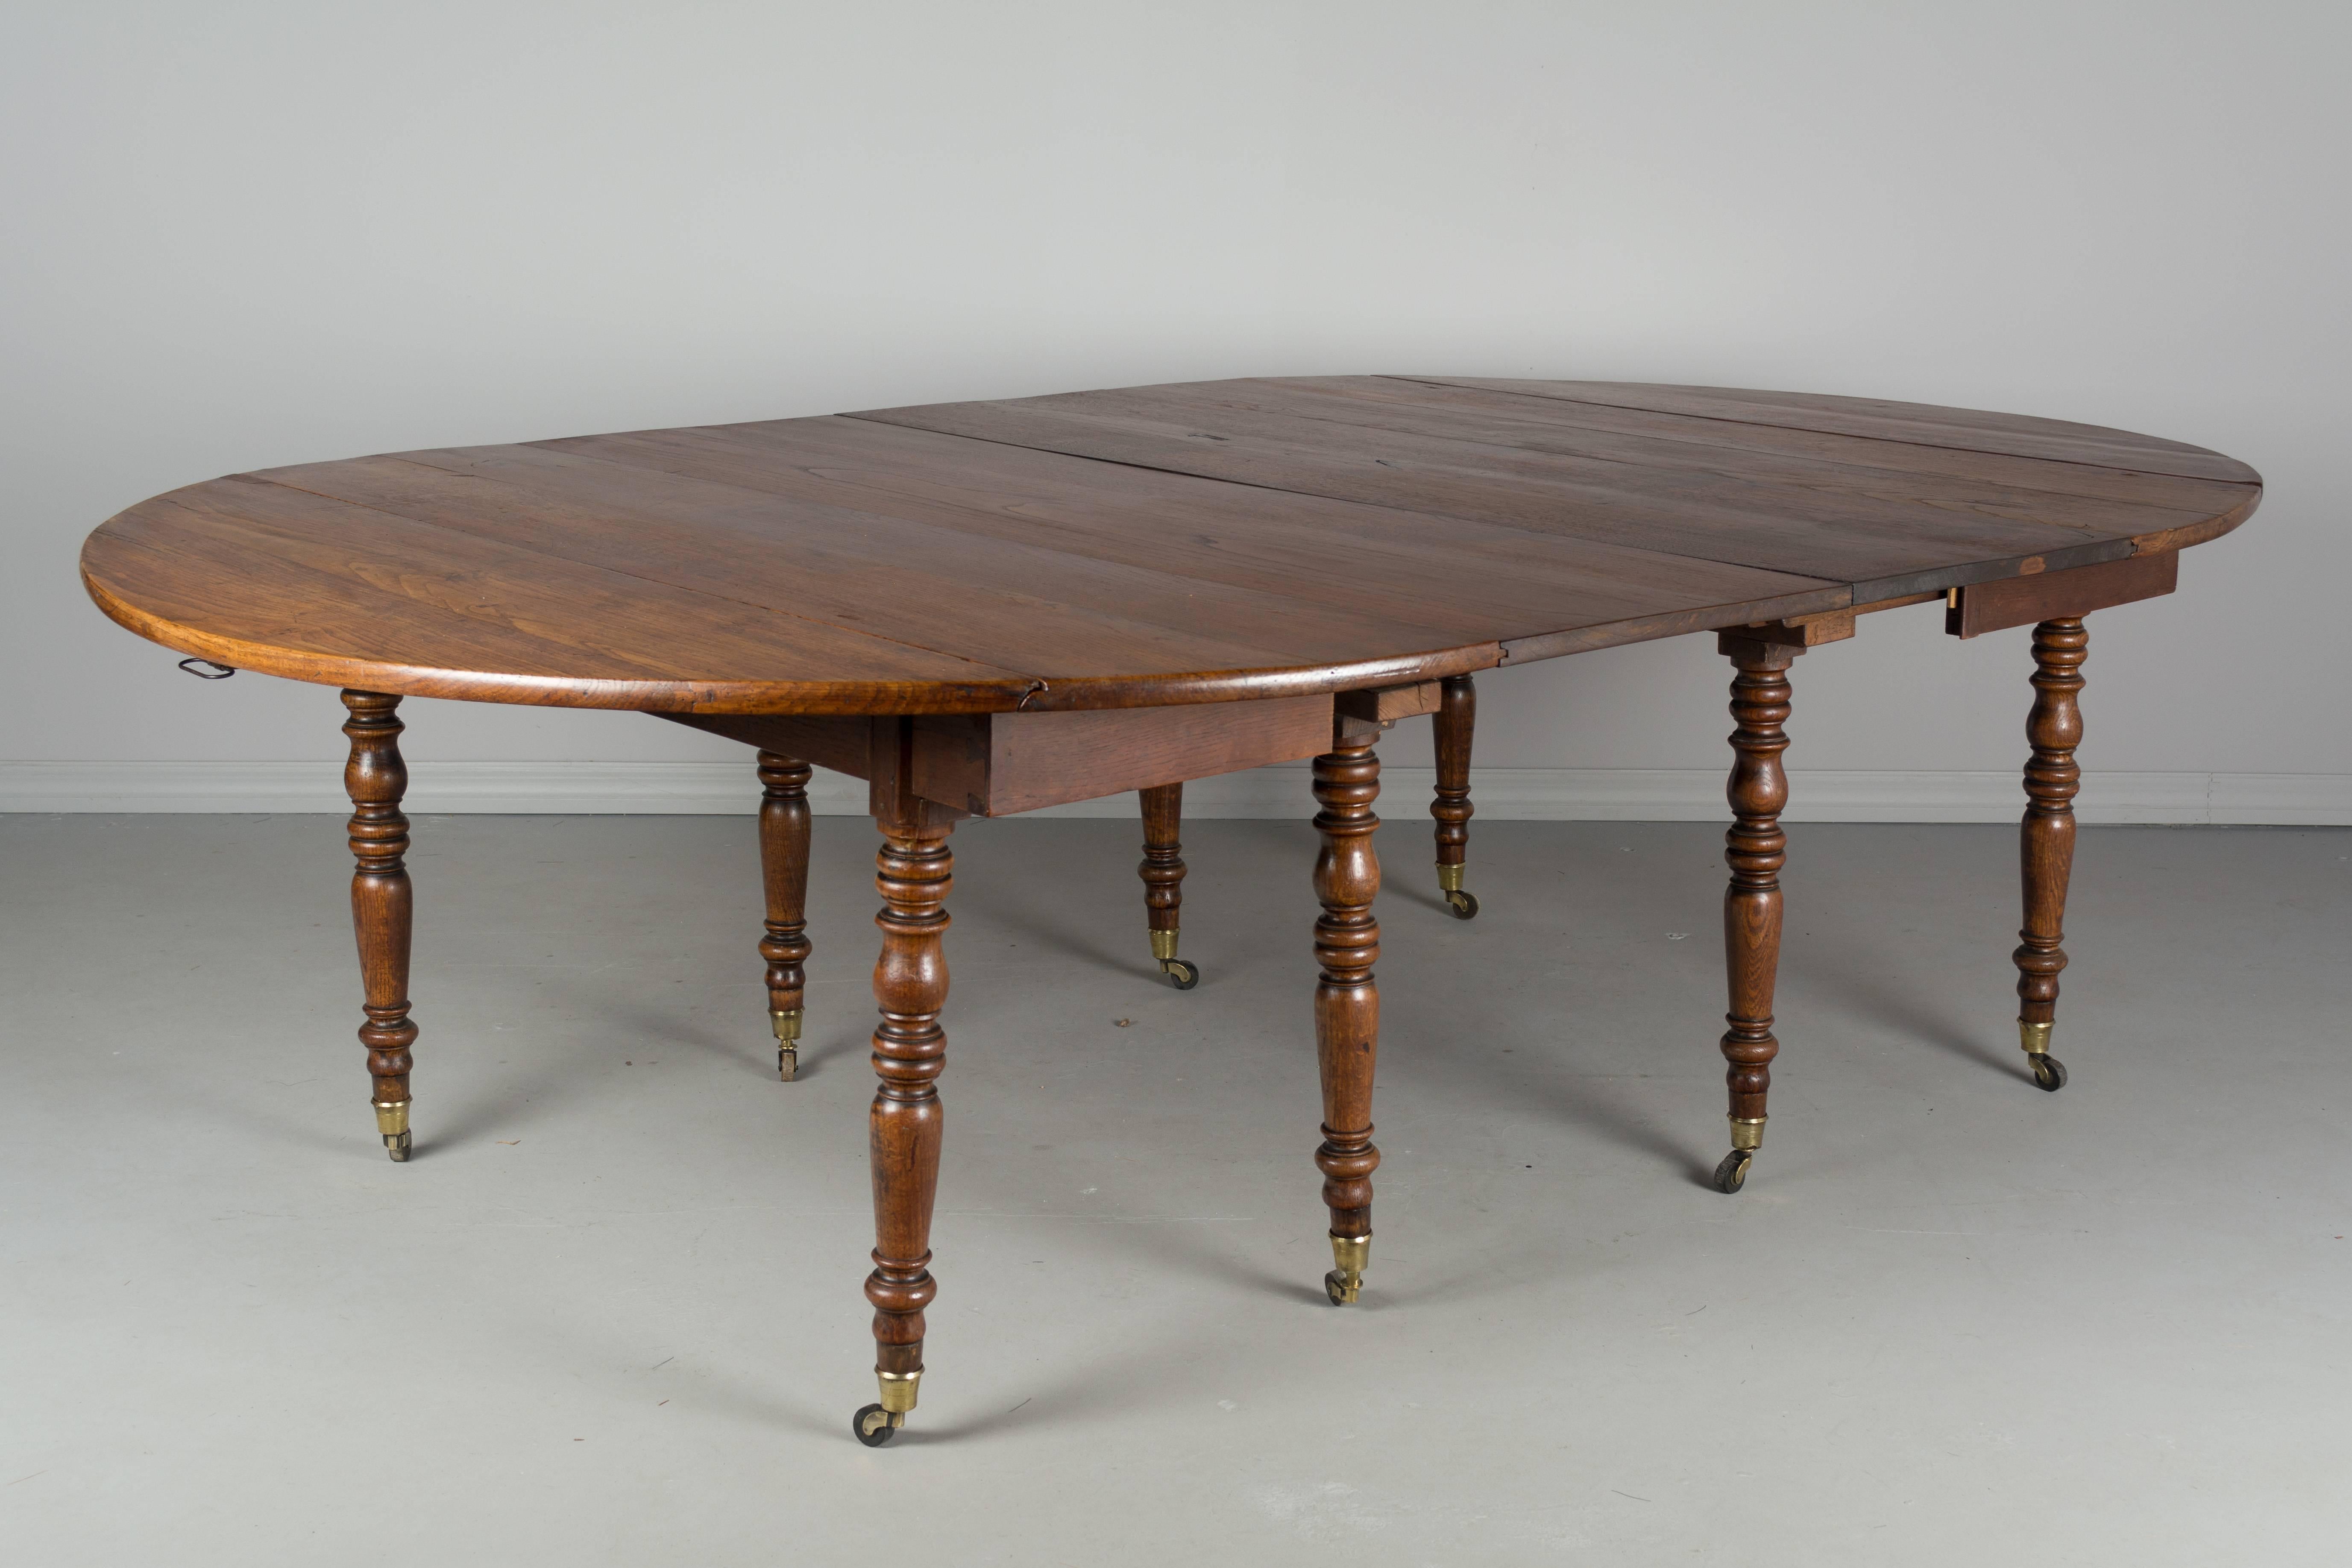 A 19th century Louis Philippe drop-leaf dining extension table made of chestnut. Eight turned legs ending in brass sabots and castors. Six new leaves of solid chestnut. Waxed finish. This table when fully open is almost 15 feet long and seats 18-20